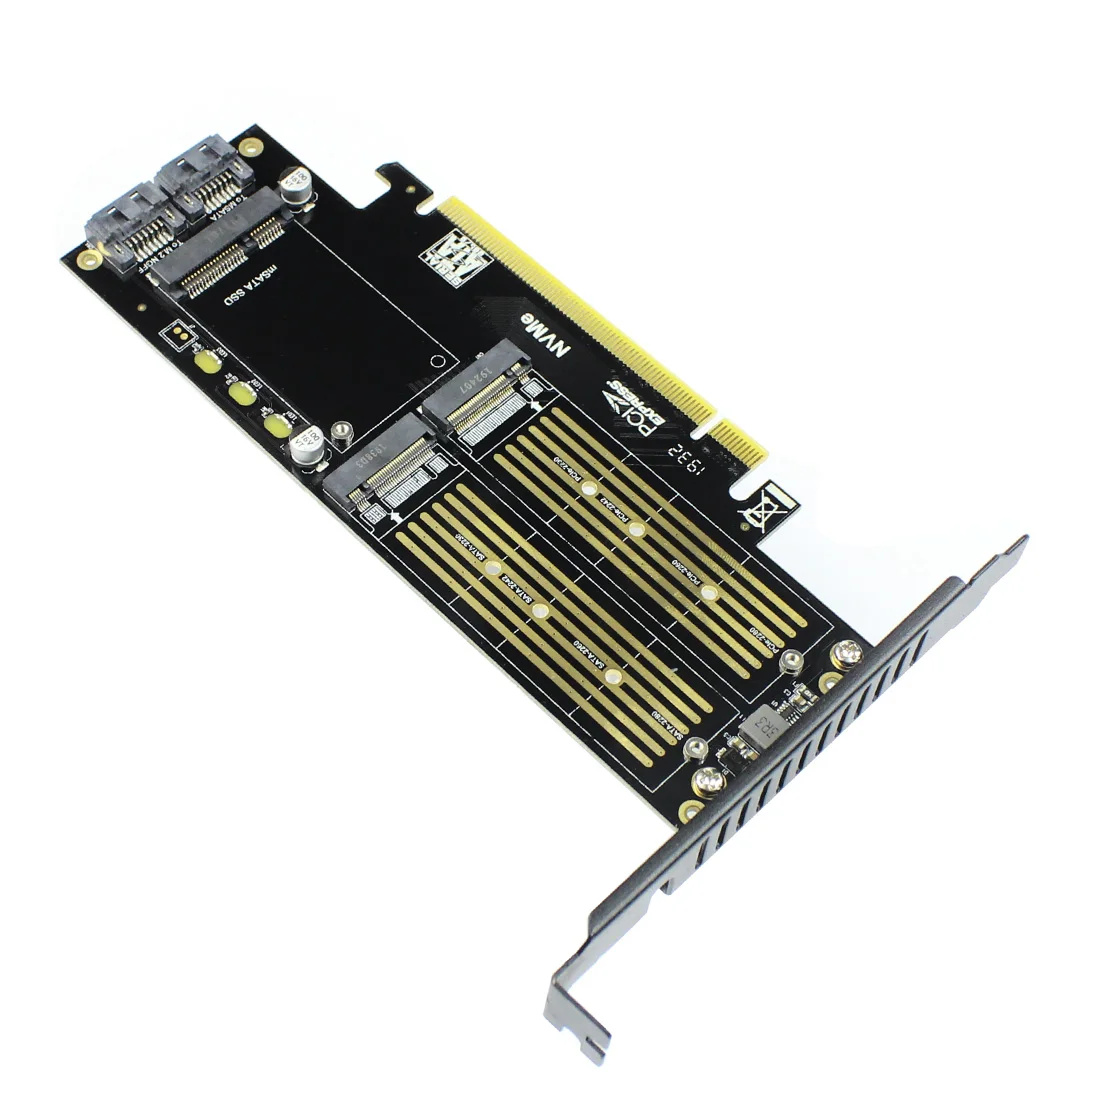 

JEYI SK16 M.2 for NVMe SSD for NGFF to PCIE 3.0 X4 Adapter M Key B Key mSATA Suppor PCI Express 3.0 3 in 1 Converter add on card